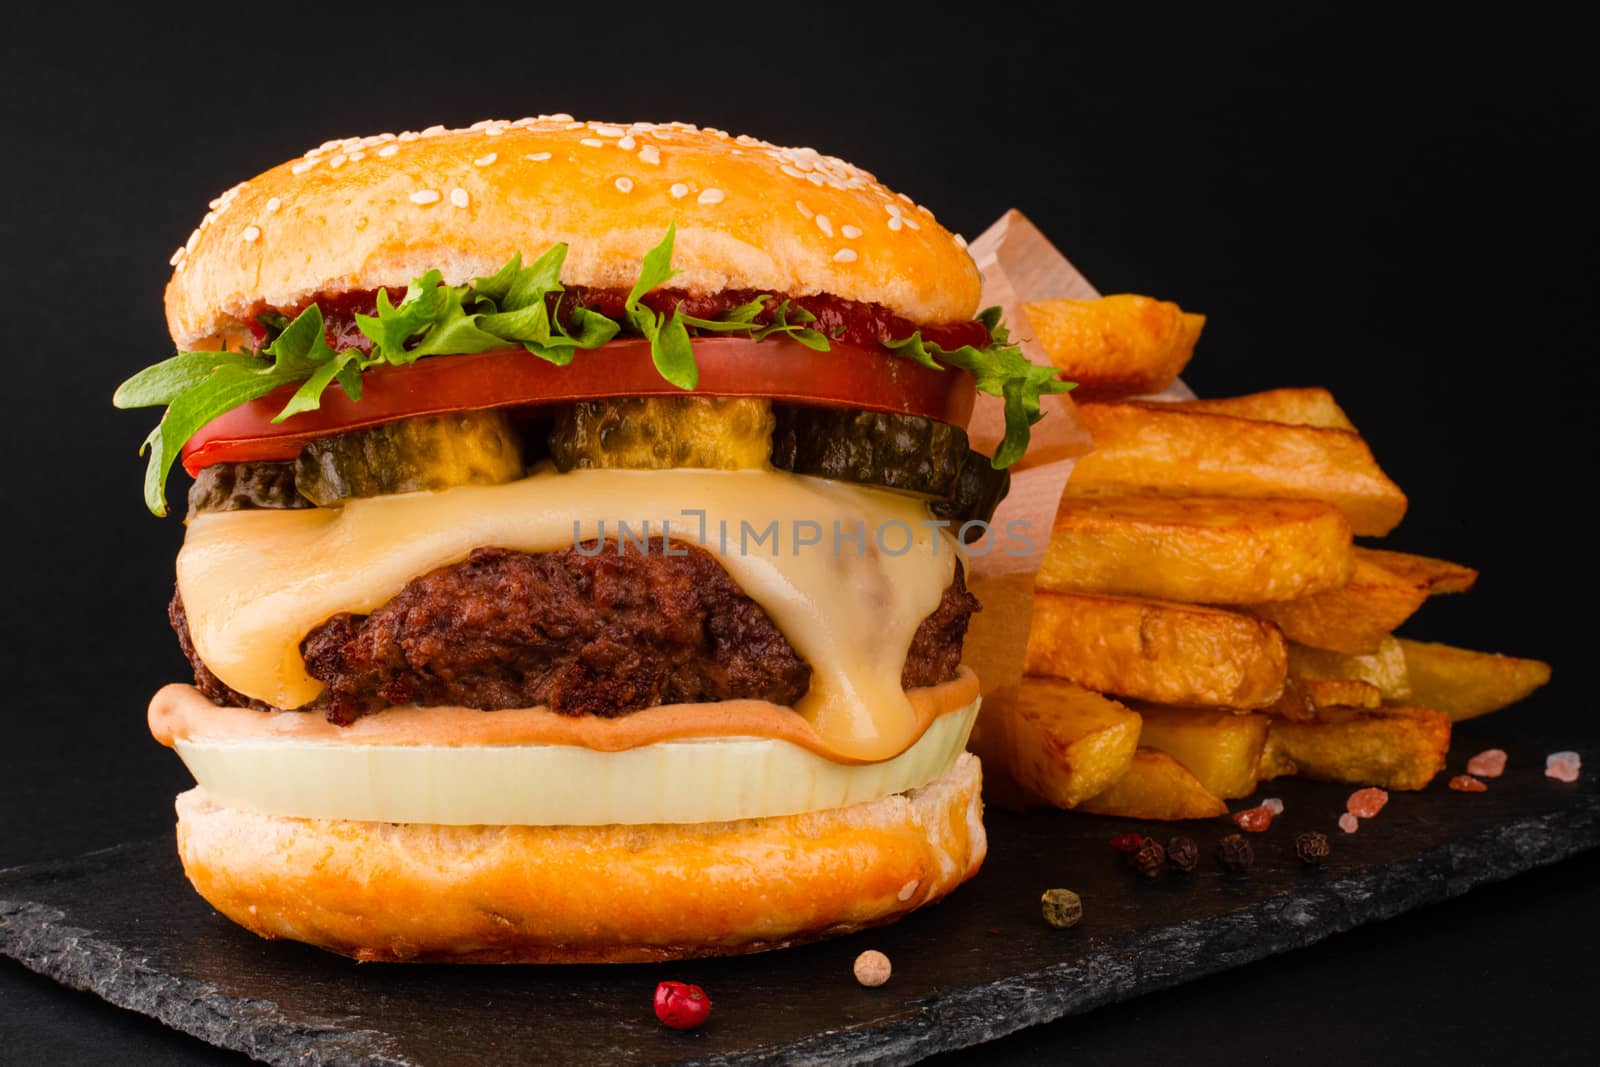 One big tall classic hamburger burger cheeseburger with french fries on black stone plate on black background with copy space for text